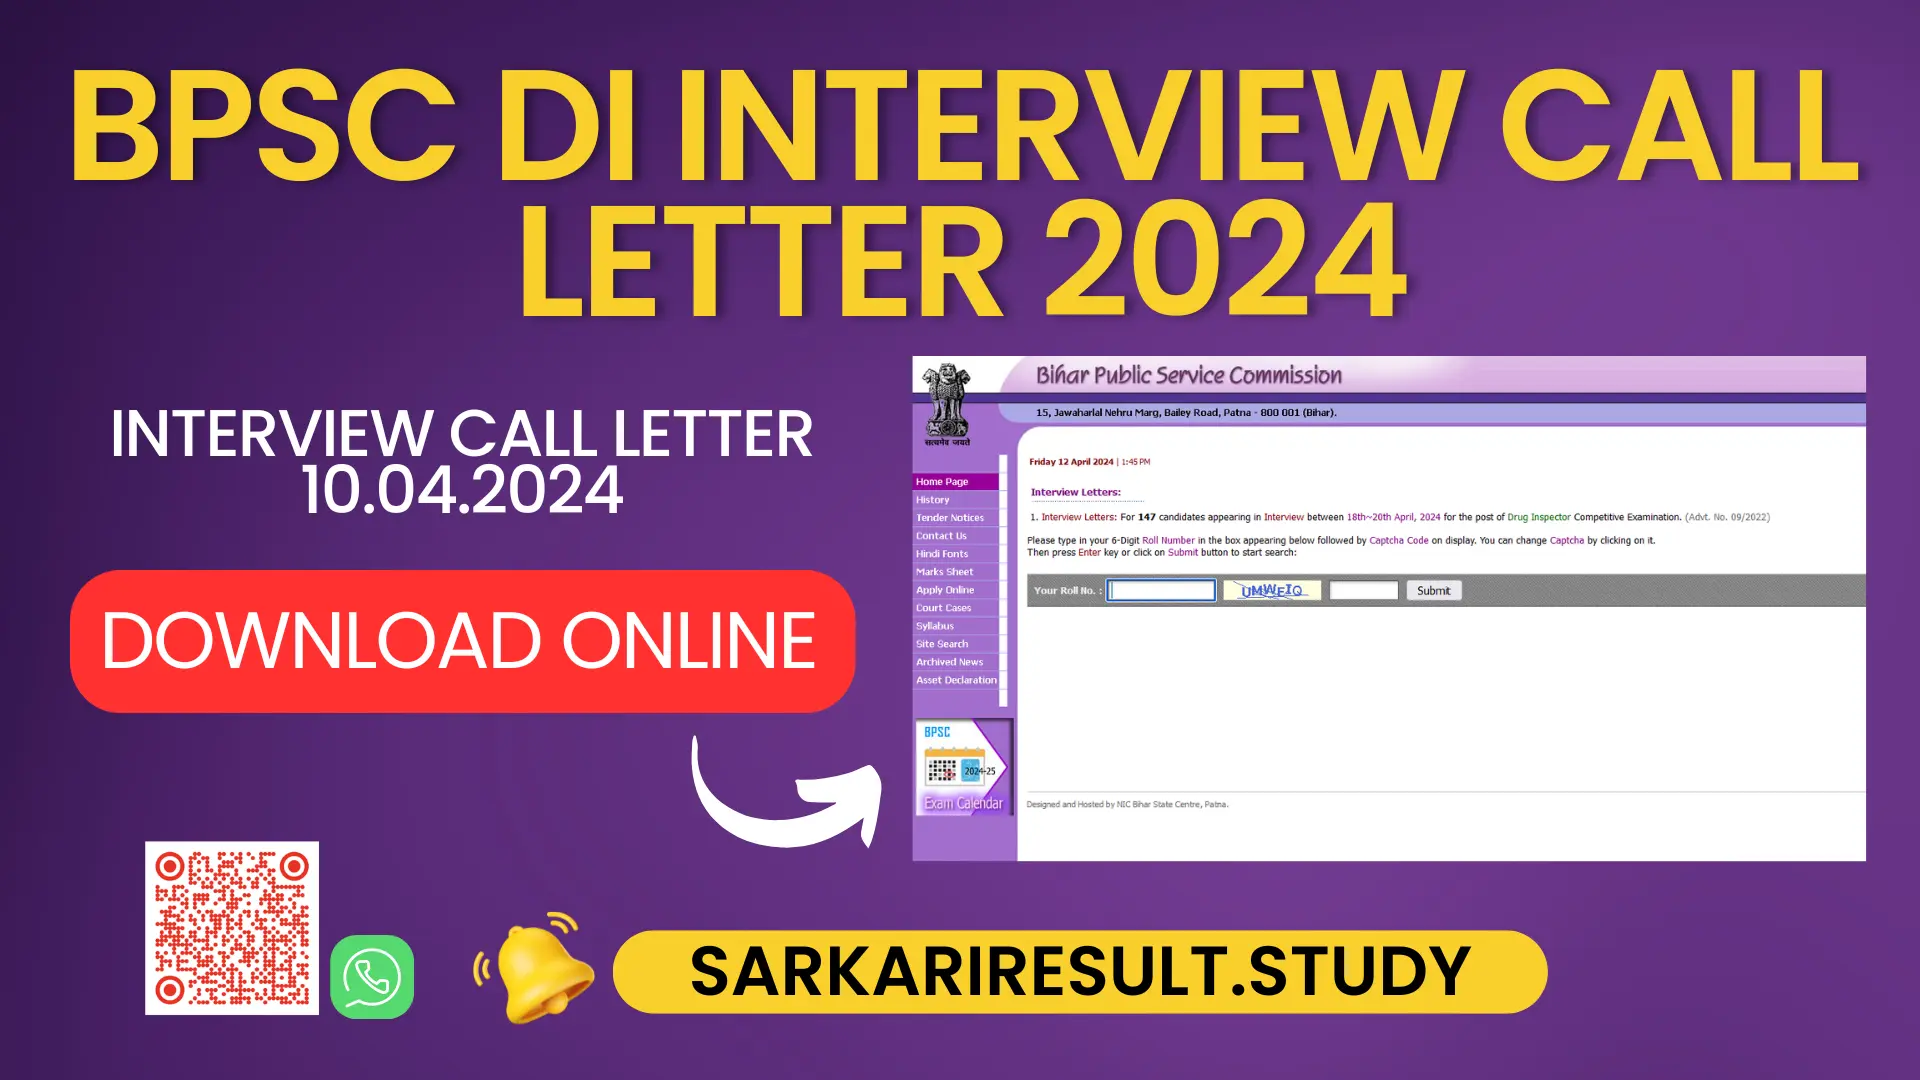 BPSC DI Interview Call Letter 2024